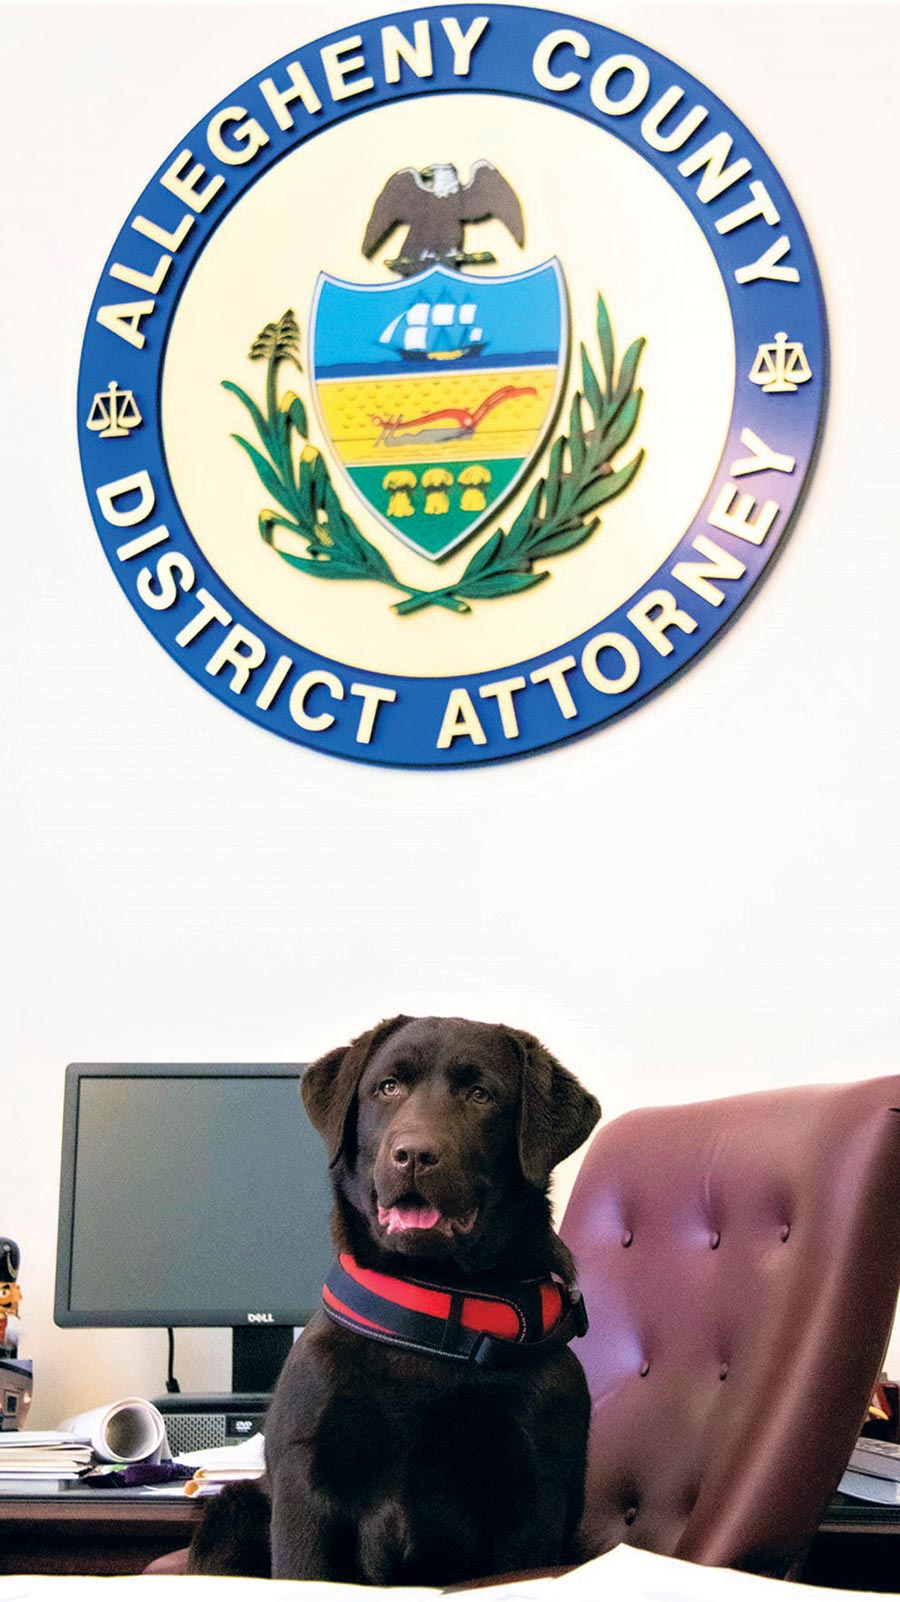 a large chocolate Labrador sits on a red swivel arm chair at a desk while the Allegheny County District Attorney seal sits on a wall in the background